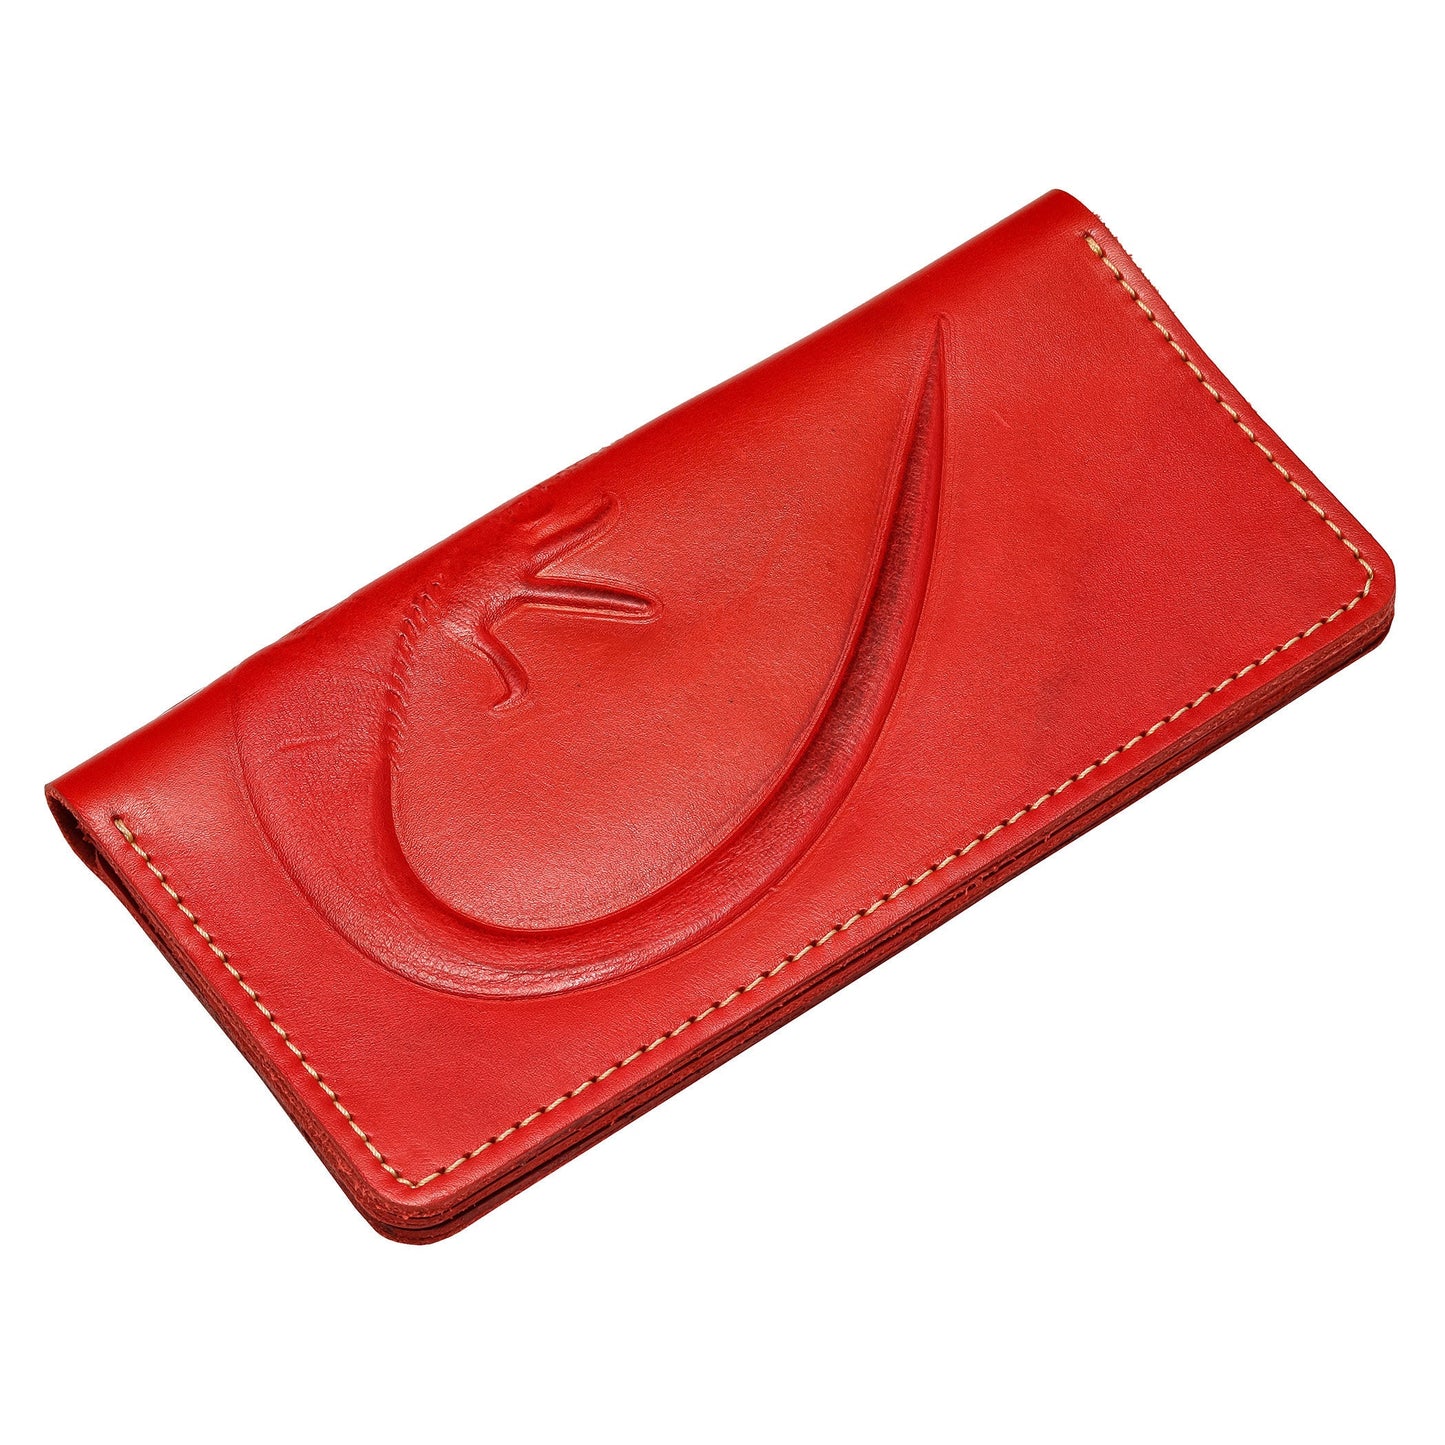 Women's Wallet | Ladies Leather Wallet With Card Holder | Zip Coin Pocket | Women's Genuine Leather Wallet | Gift For Her